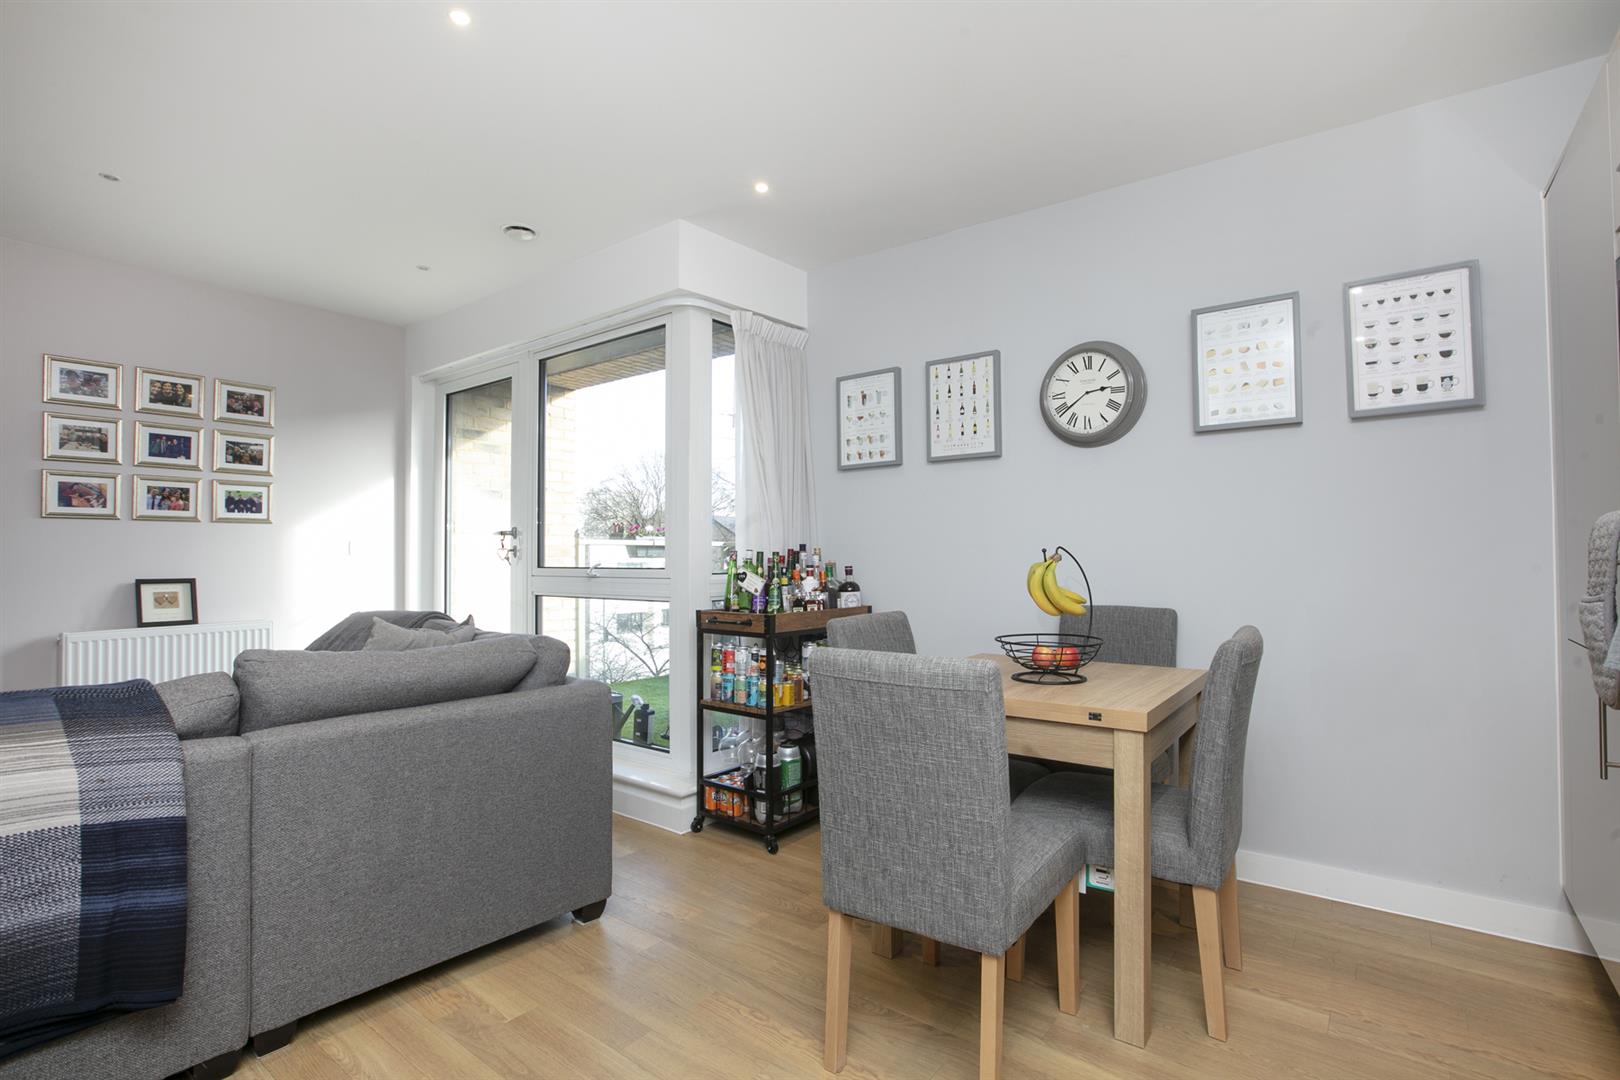 Flat - Purpose Built For Sale in Elmington Road, Camberwell, SE5 904 view5